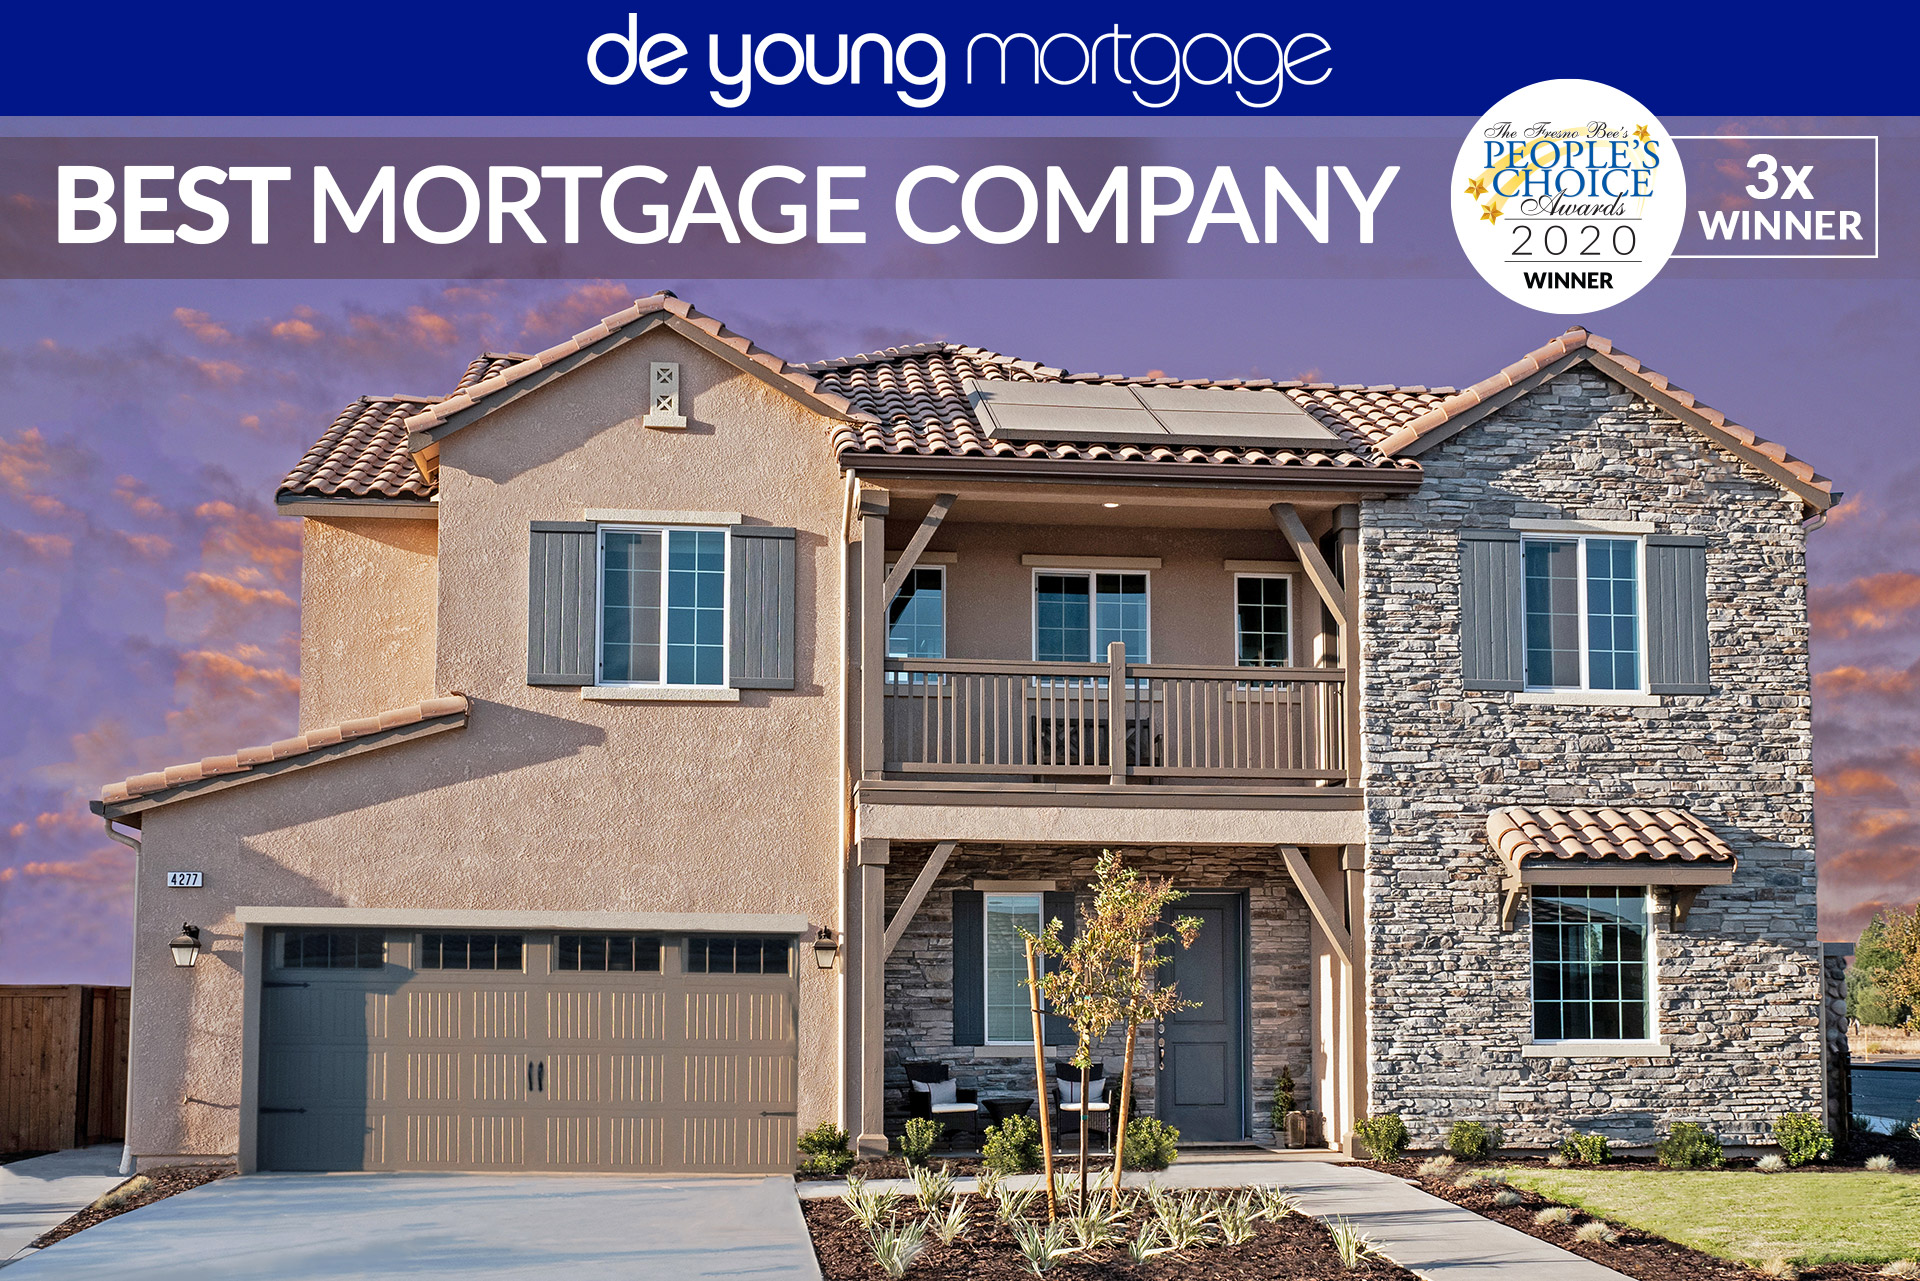 De Young Mortgage honored as a Fresno Bee People’s Choice Award recipient for the third time.